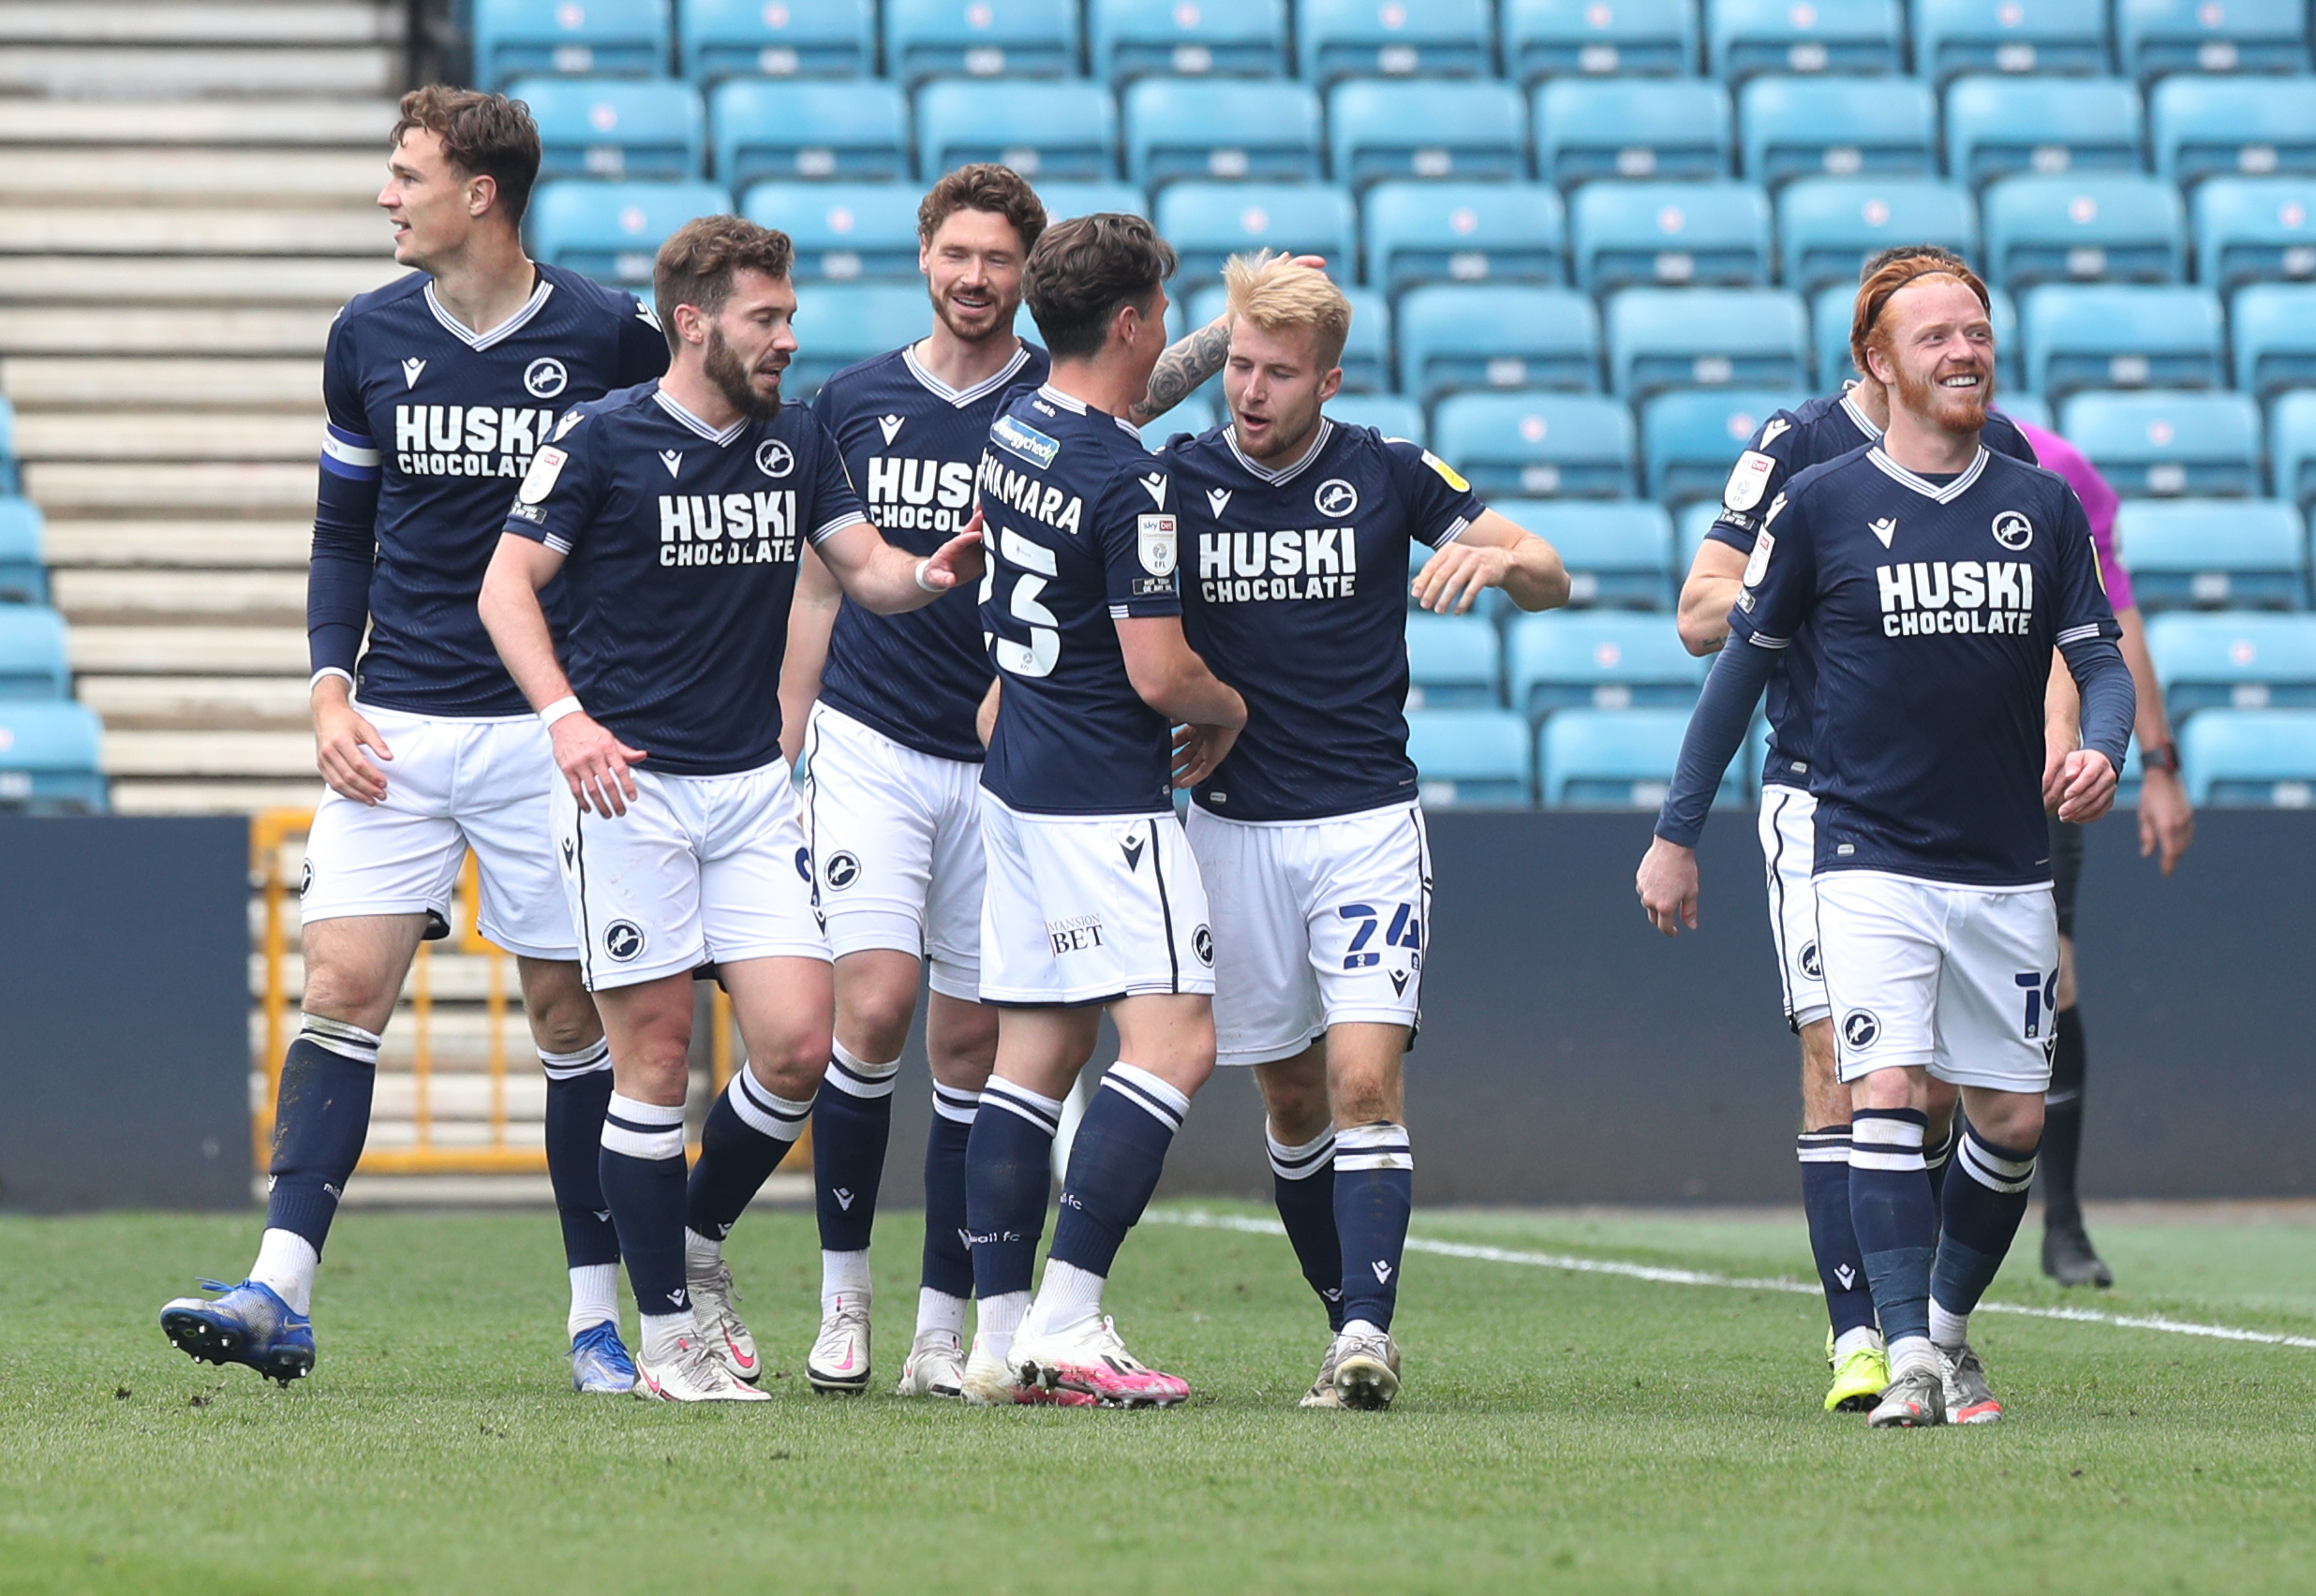 Millwall FC – The Grass Roots Tourist